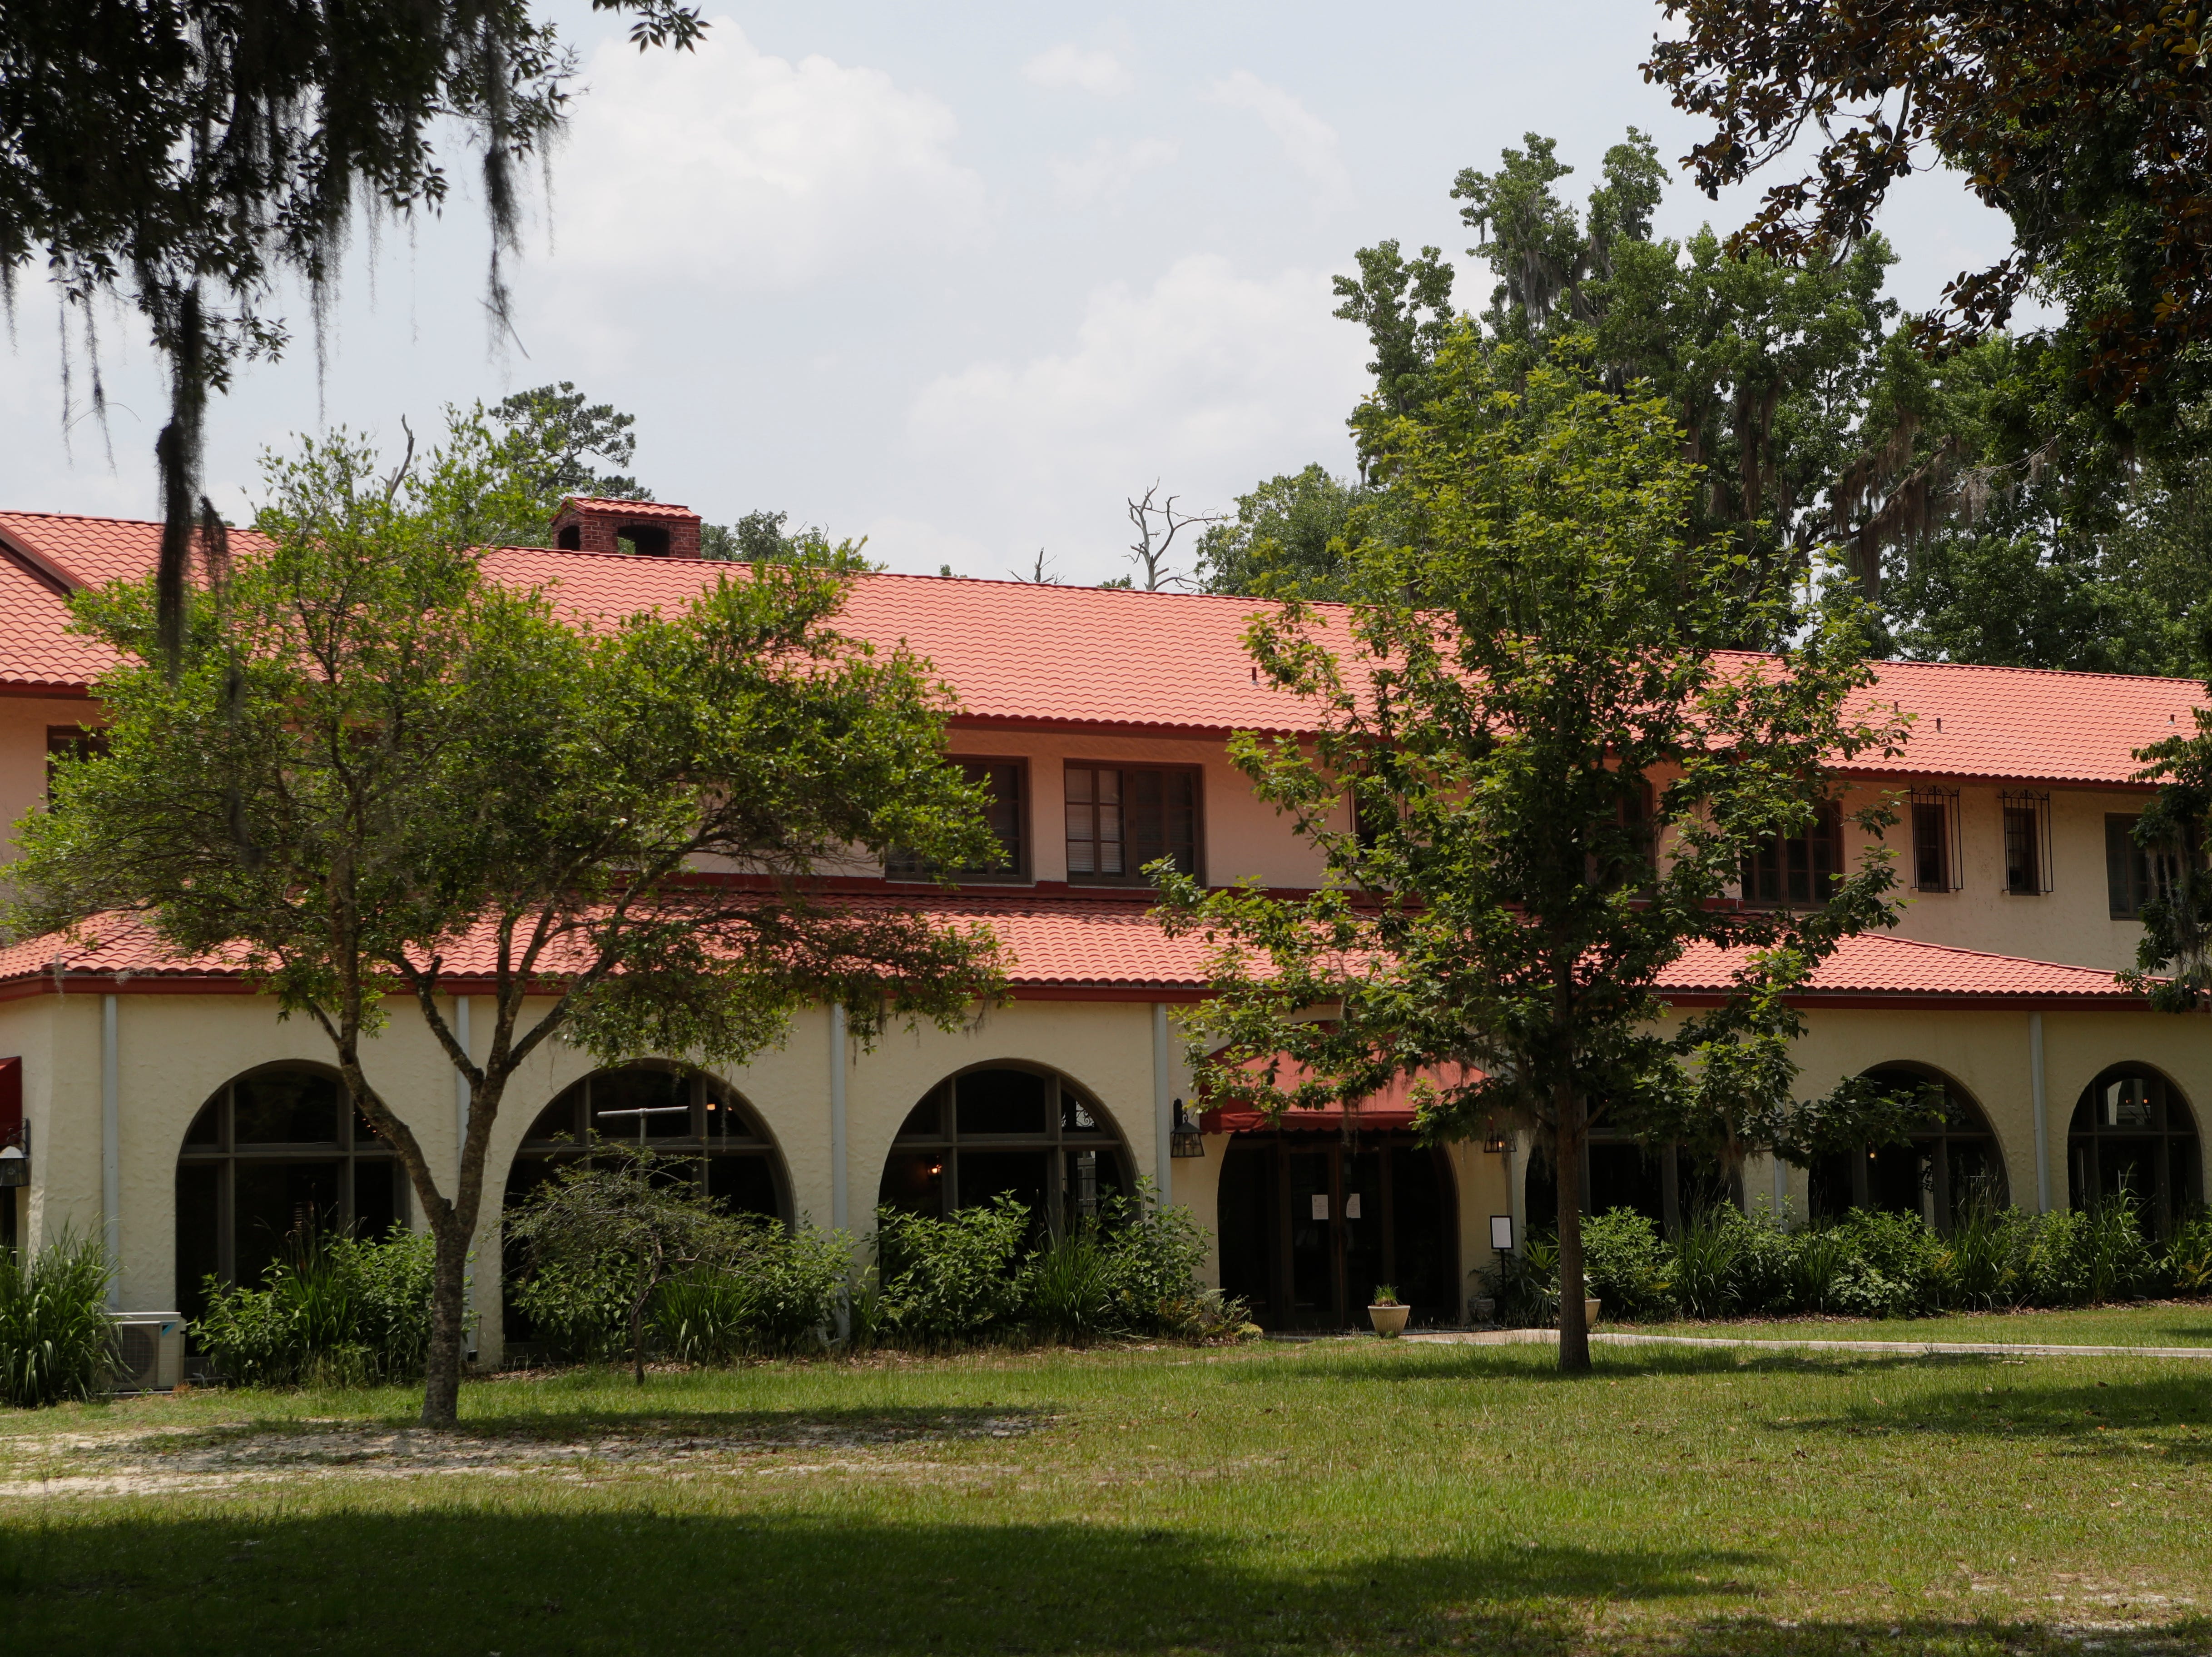 The Wakulla Springs Lodge was built in 1937. Its interior holds 27 guest rooms, a gift shop and restaurant. Weddings, family reunions and other events are held inside. 